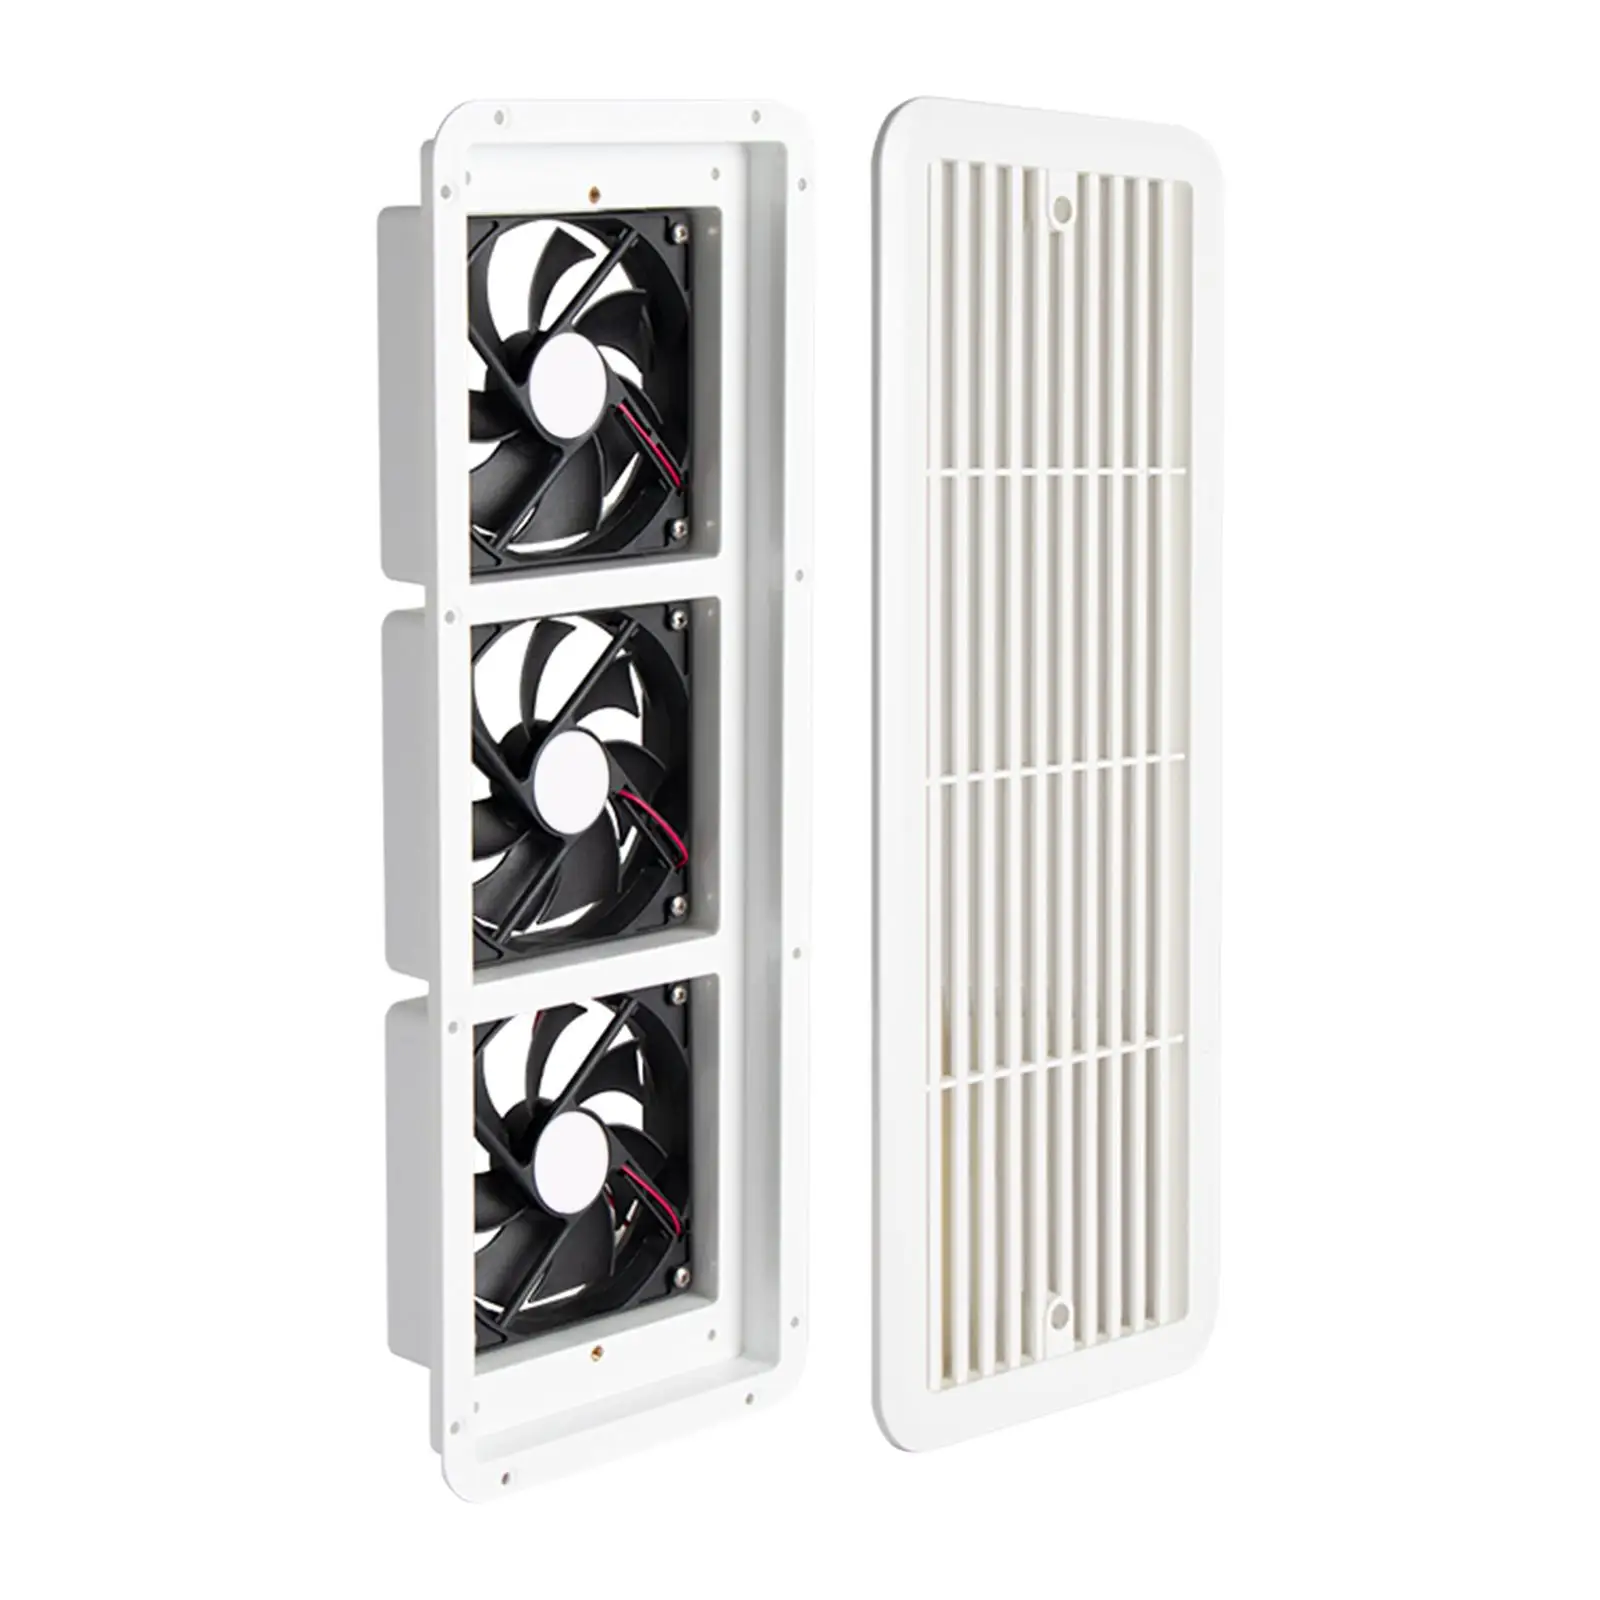 Rack Mounted Cooling Fan with Speed Controller IP55 Waterproof for Refrigerator Vent Cabinets Camper Truck Caravan RV